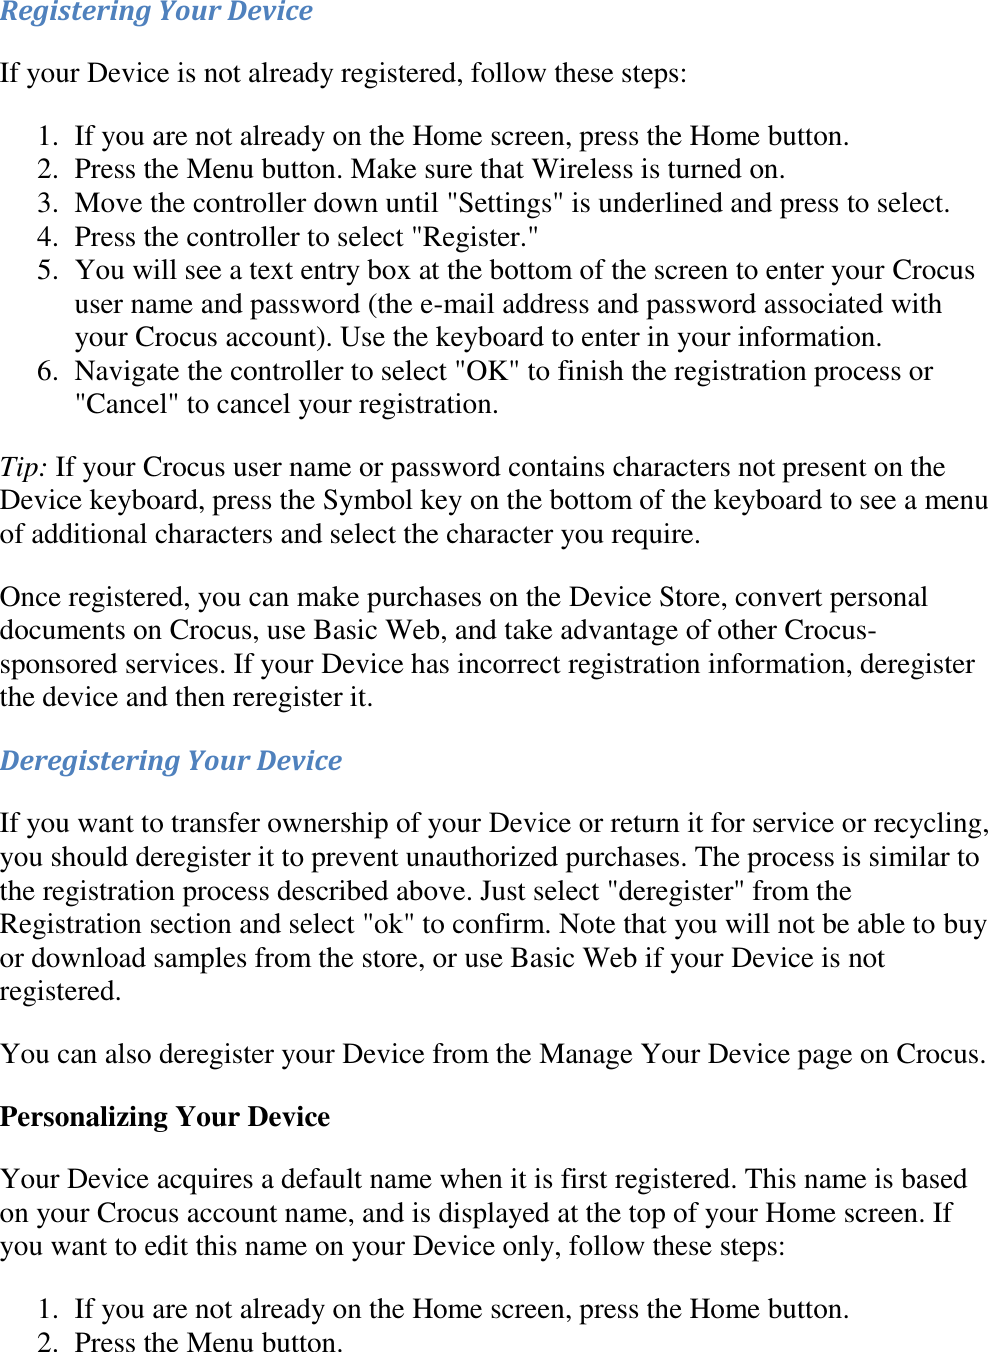   Registering Your Device If your Device is not already registered, follow these steps: 1. If you are not already on the Home screen, press the Home button.  2. Press the Menu button. Make sure that Wireless is turned on.  3. Move the controller down until &quot;Settings&quot; is underlined and press to select.  4. Press the controller to select &quot;Register.&quot;  5. You will see a text entry box at the bottom of the screen to enter your Crocus user name and password (the e-mail address and password associated with your Crocus account). Use the keyboard to enter in your information.  6. Navigate the controller to select &quot;OK&quot; to finish the registration process or &quot;Cancel&quot; to cancel your registration.  Tip: If your Crocus user name or password contains characters not present on the Device keyboard, press the Symbol key on the bottom of the keyboard to see a menu of additional characters and select the character you require. Once registered, you can make purchases on the Device Store, convert personal documents on Crocus, use Basic Web, and take advantage of other Crocus-sponsored services. If your Device has incorrect registration information, deregister the device and then reregister it. Deregistering Your Device If you want to transfer ownership of your Device or return it for service or recycling, you should deregister it to prevent unauthorized purchases. The process is similar to the registration process described above. Just select &quot;deregister&quot; from the Registration section and select &quot;ok&quot; to confirm. Note that you will not be able to buy or download samples from the store, or use Basic Web if your Device is not registered. You can also deregister your Device from the Manage Your Device page on Crocus. Personalizing Your Device Your Device acquires a default name when it is first registered. This name is based on your Crocus account name, and is displayed at the top of your Home screen. If you want to edit this name on your Device only, follow these steps: 1. If you are not already on the Home screen, press the Home button.  2. Press the Menu button.  